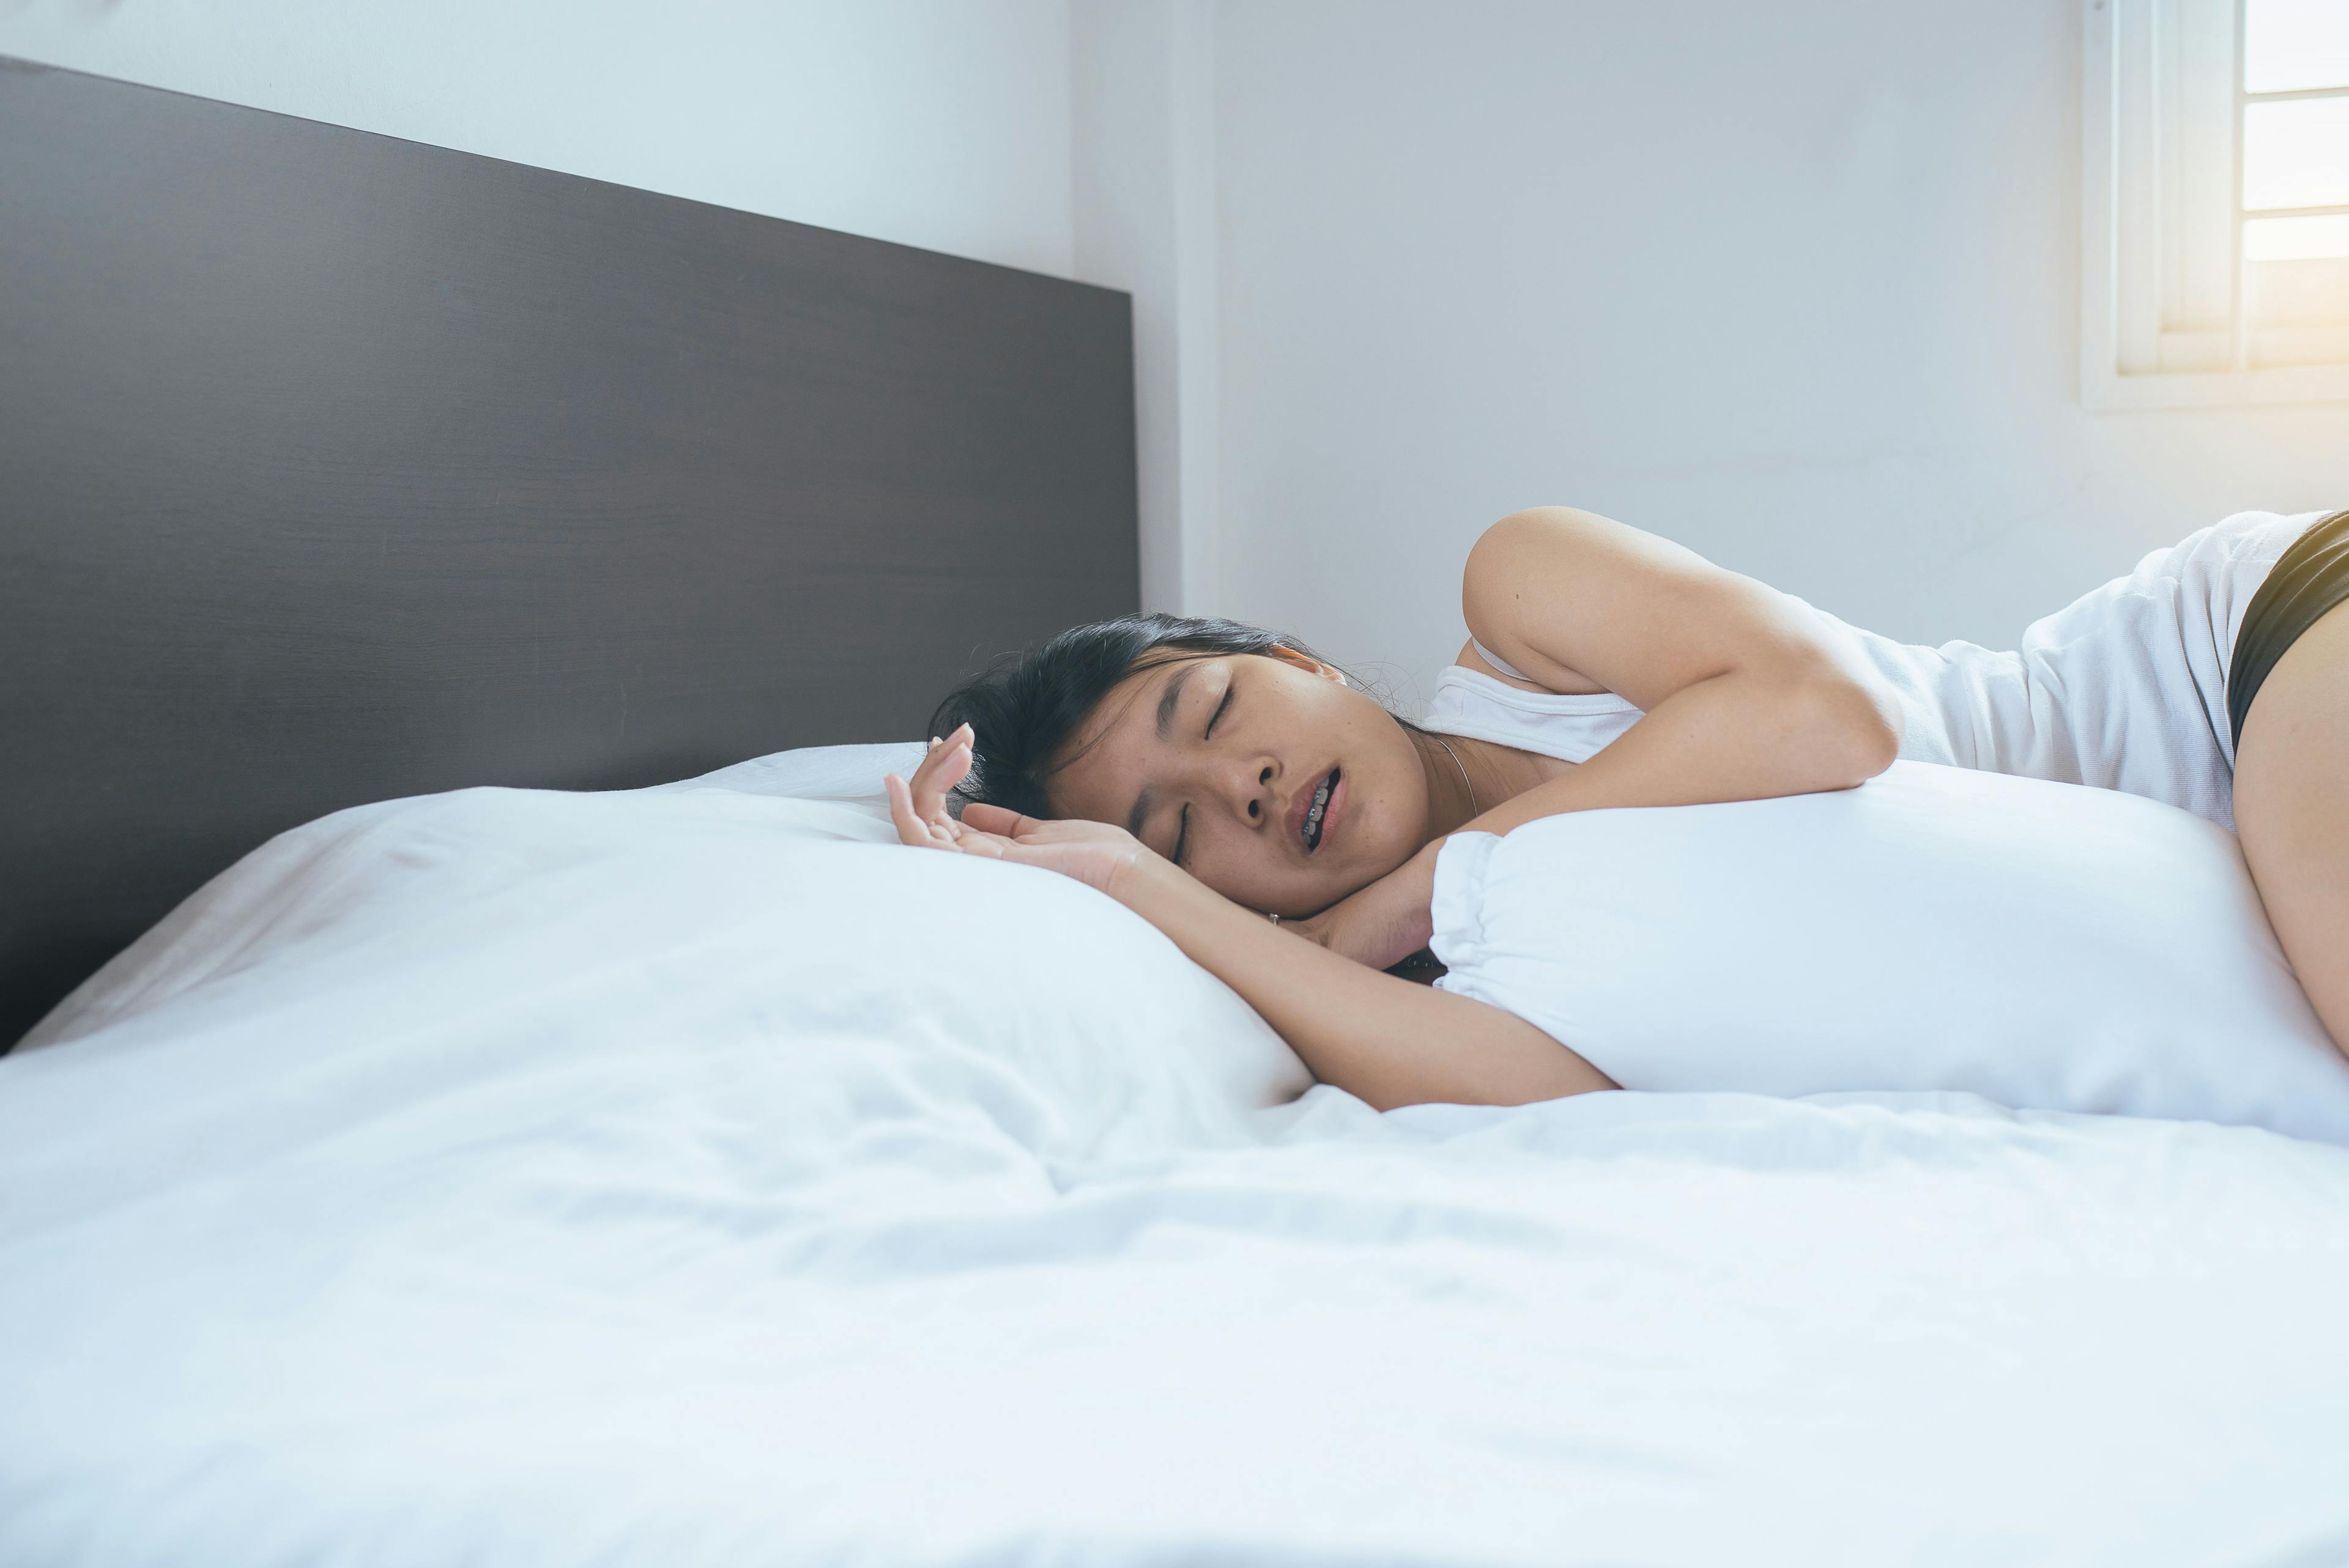 Treatment is now the first and only once-at-bedtime oxybate to be approved by the FDA for individuals with narcolepsy.